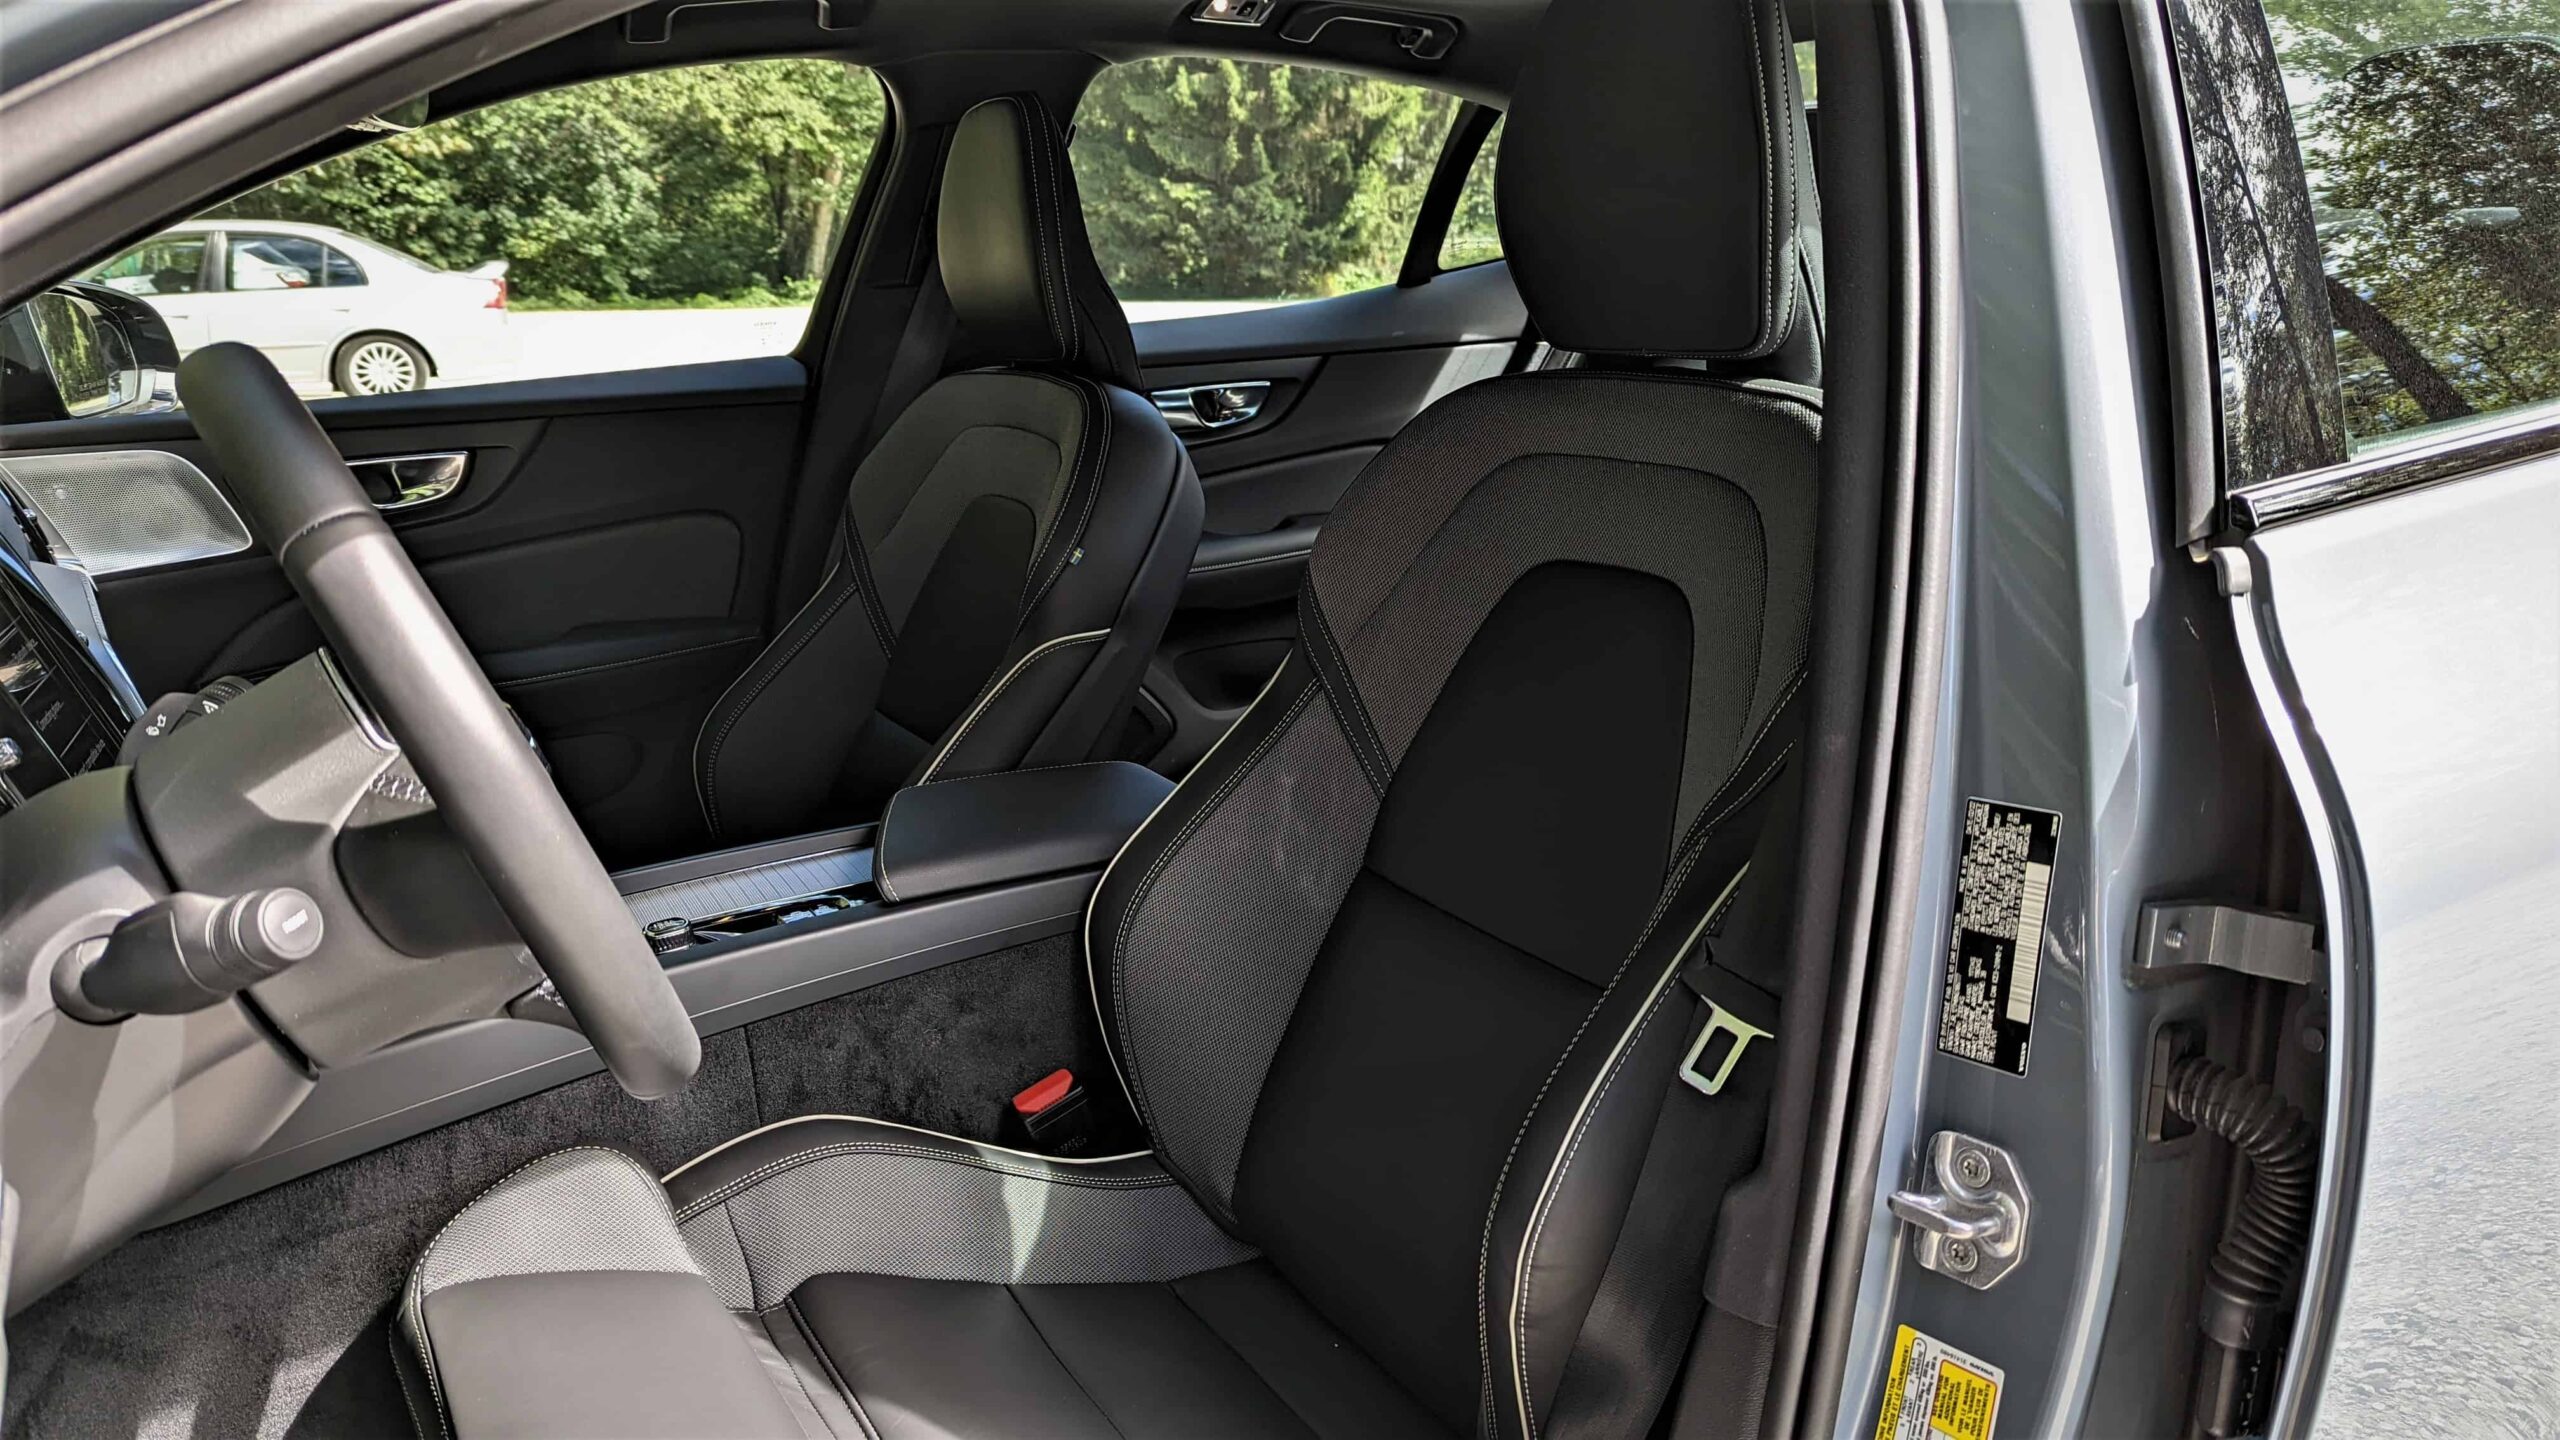 2022 Volvo S60 B5 R Design front seats scaled